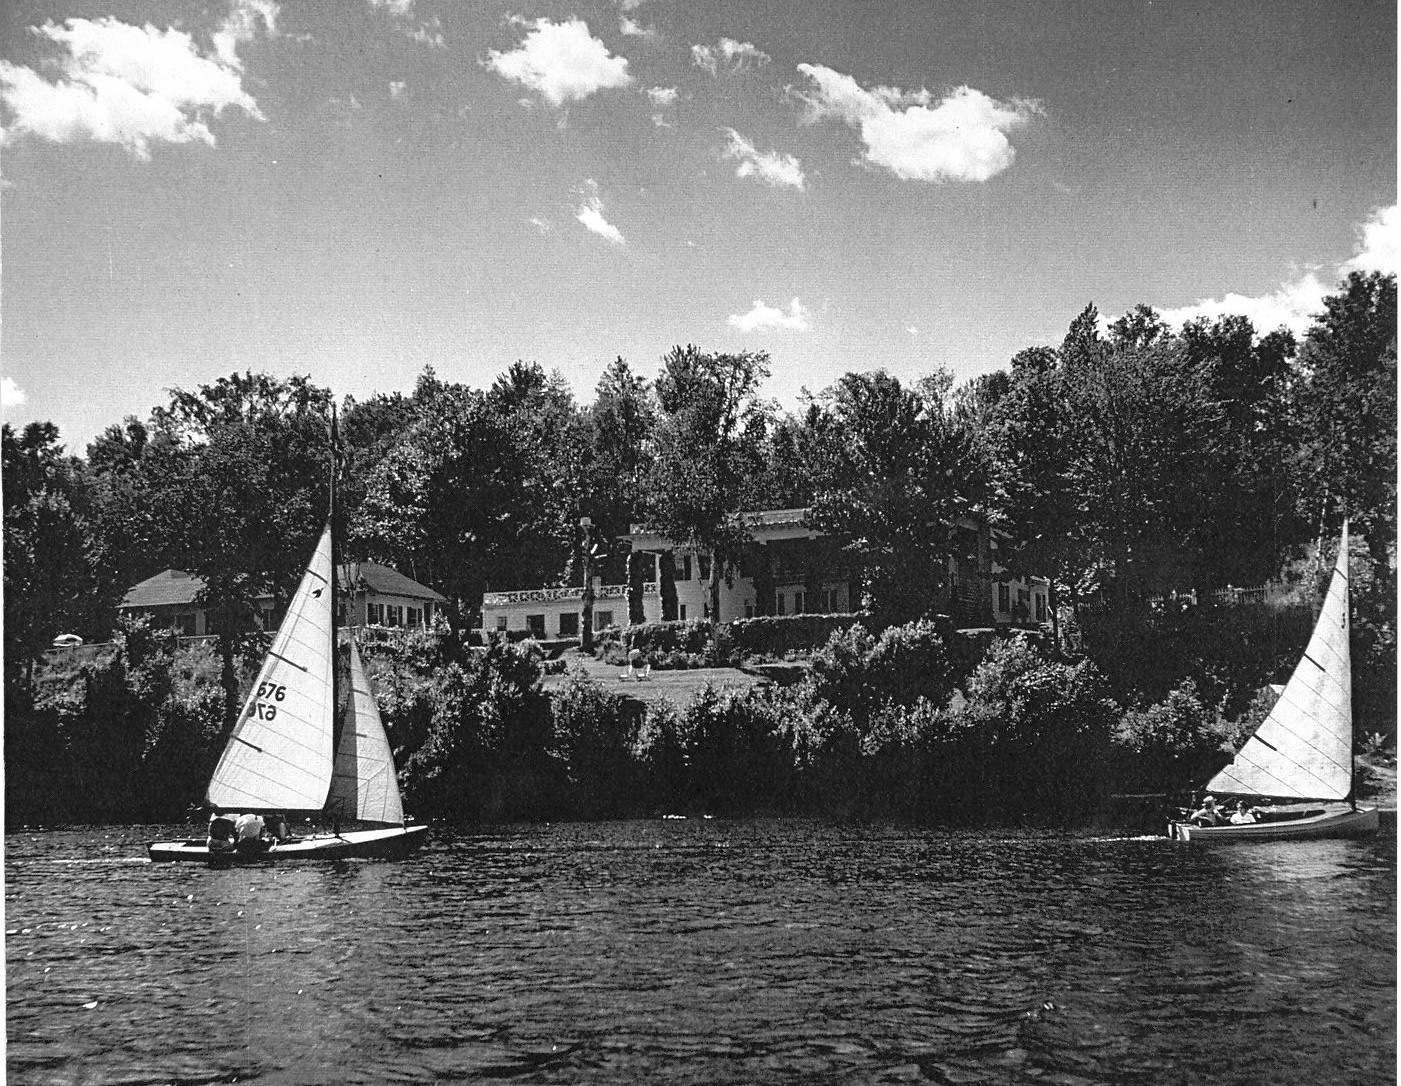 Two sailboats on the lake in front of the Manor